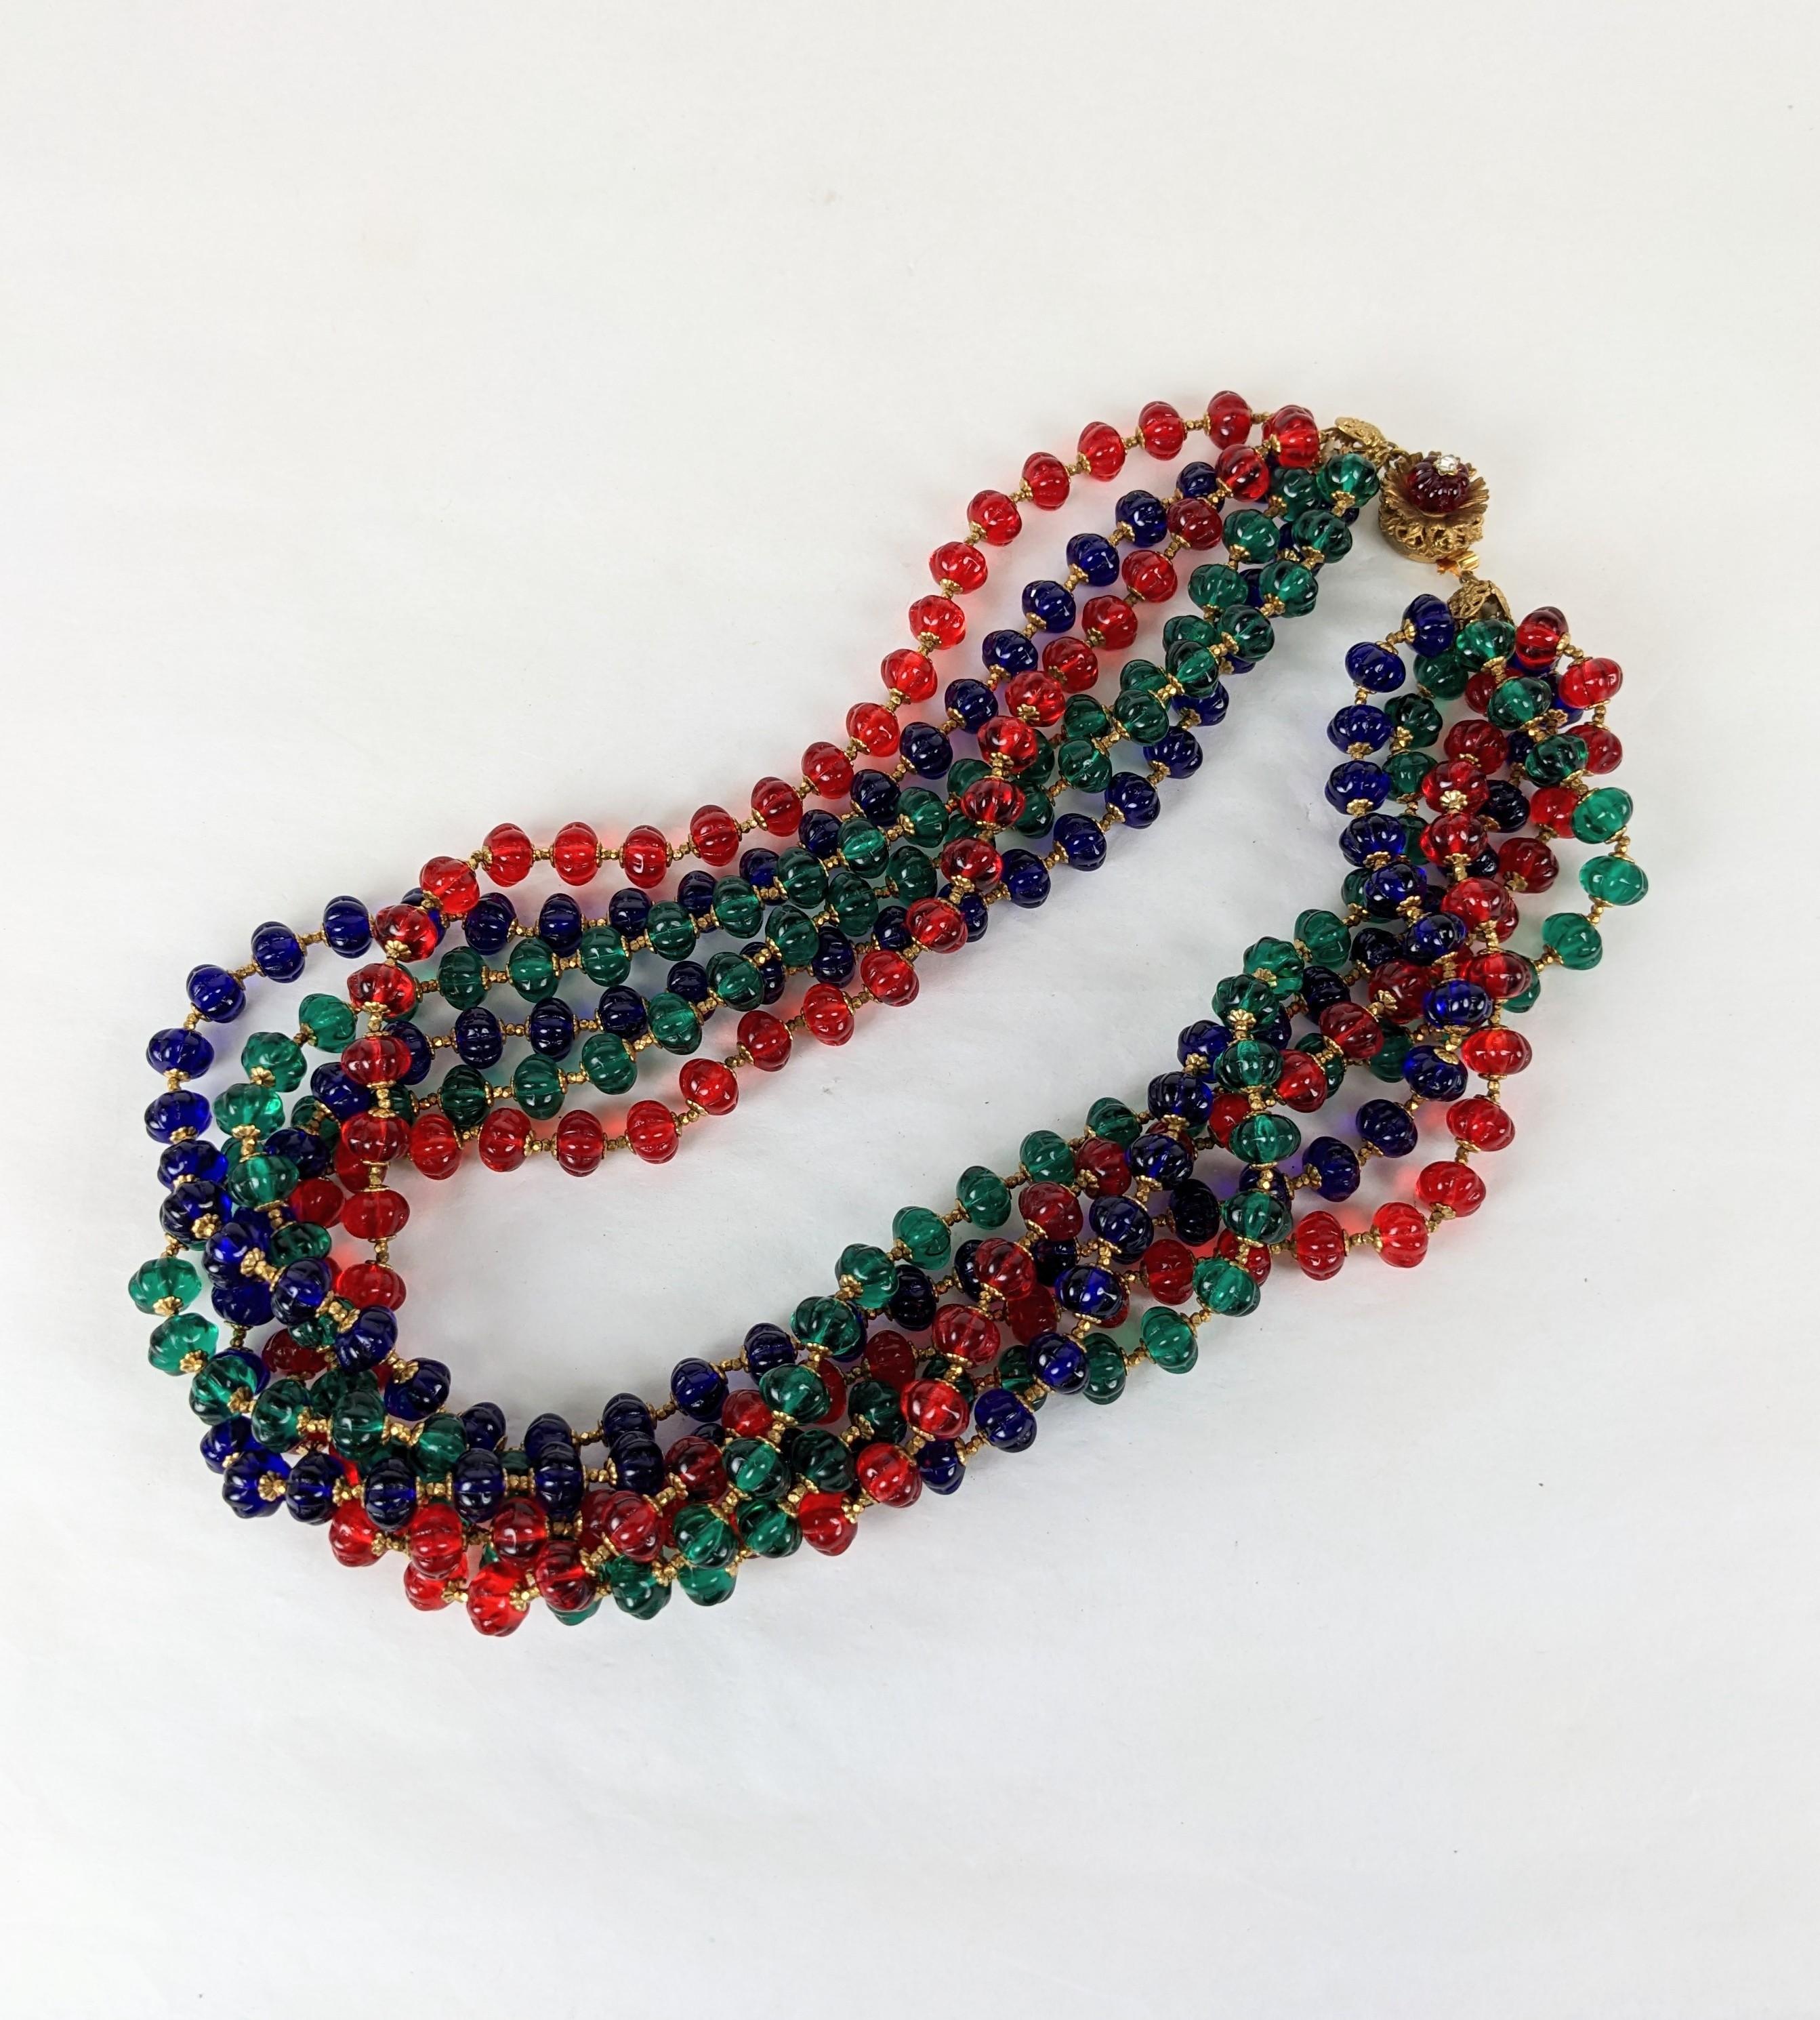 Exceptional Haskell Melon Cut Gripoix Glass Multi Bead Torsade from the 1950's. Ruby, emerald, sapphire cotele melon cut Gripoix beads are used for a 6 strand torsade with a ruby bead clasp. Hundreds of Russian gilt cut steel spacers and caps are